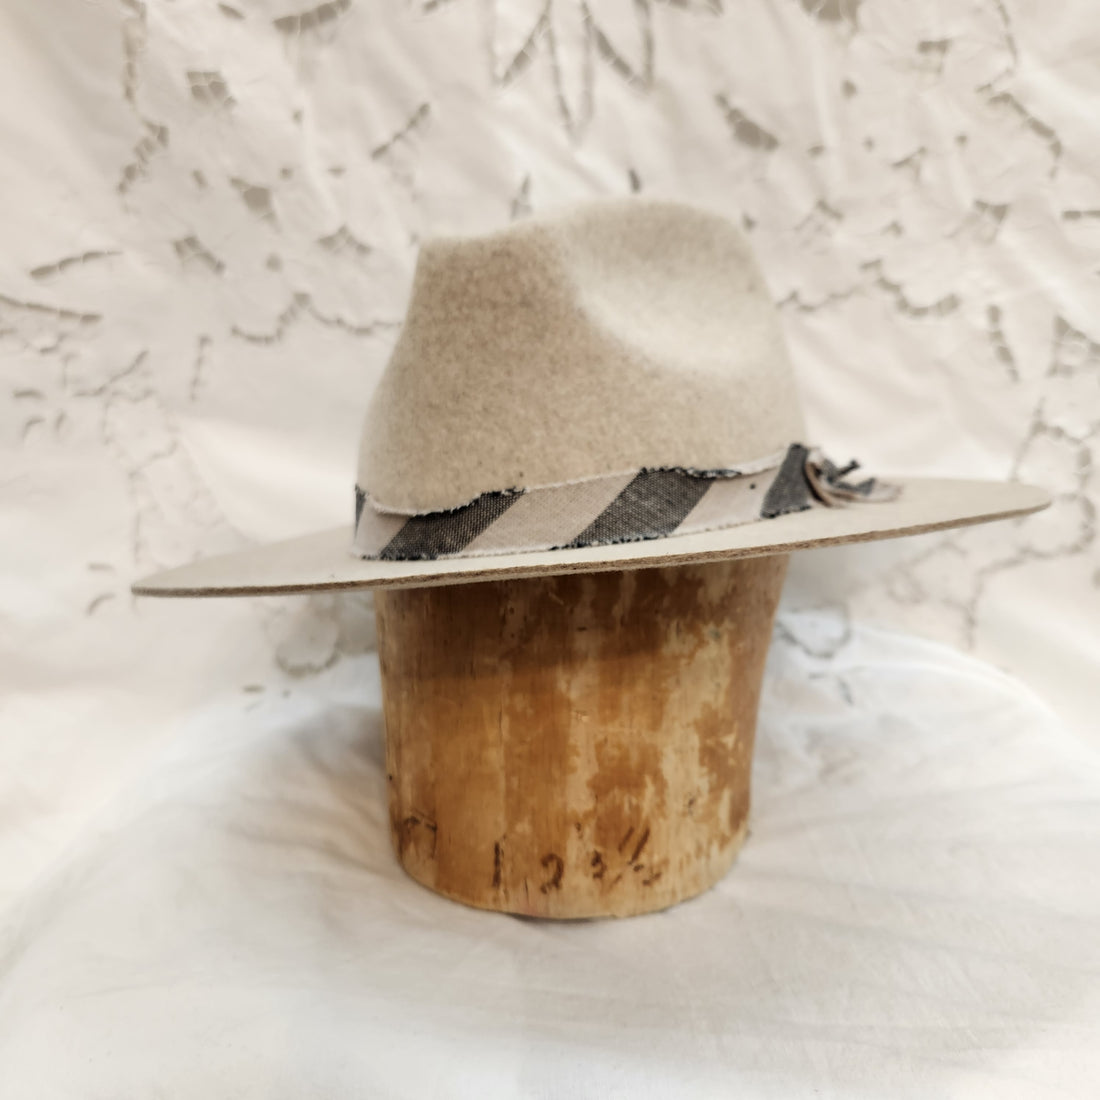 Elevate Your Style With Our Exquisite Havana Hat